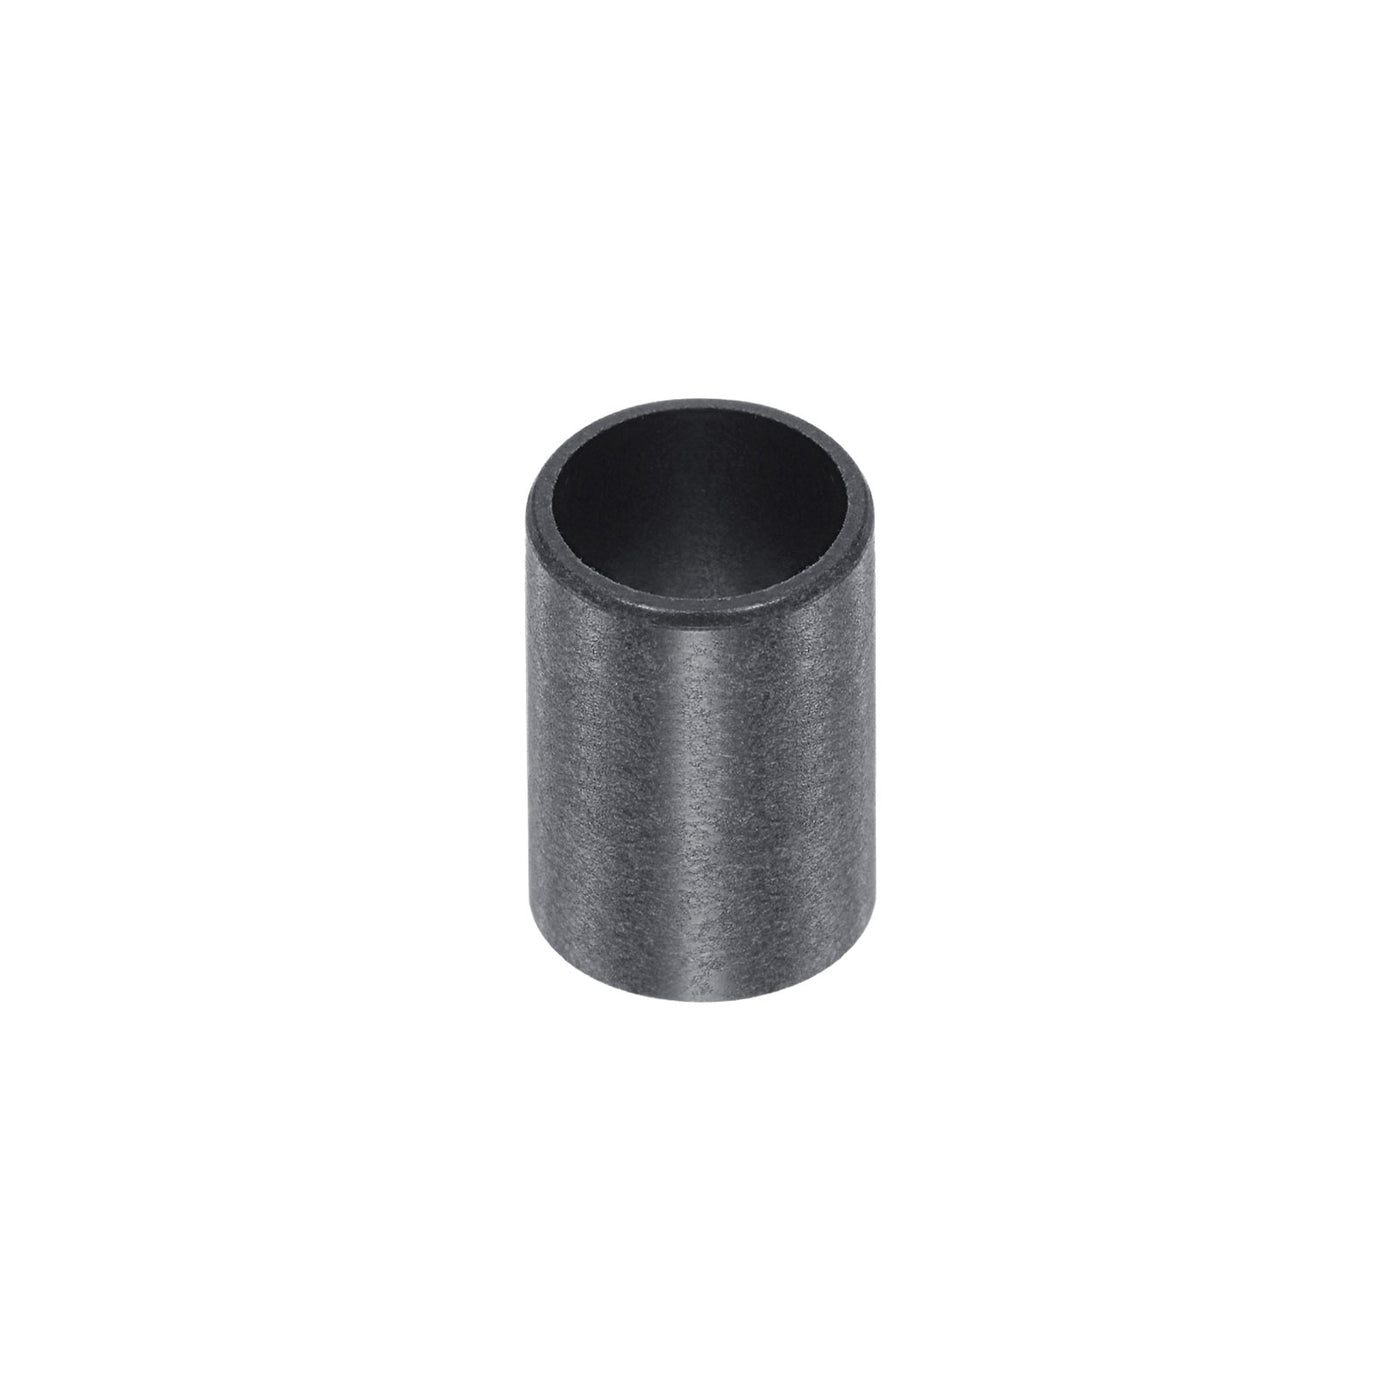 uxcell Uxcell Sleeve Bearings 10mmx12mmx20mm POM Wrapped Oilless Bushings Black